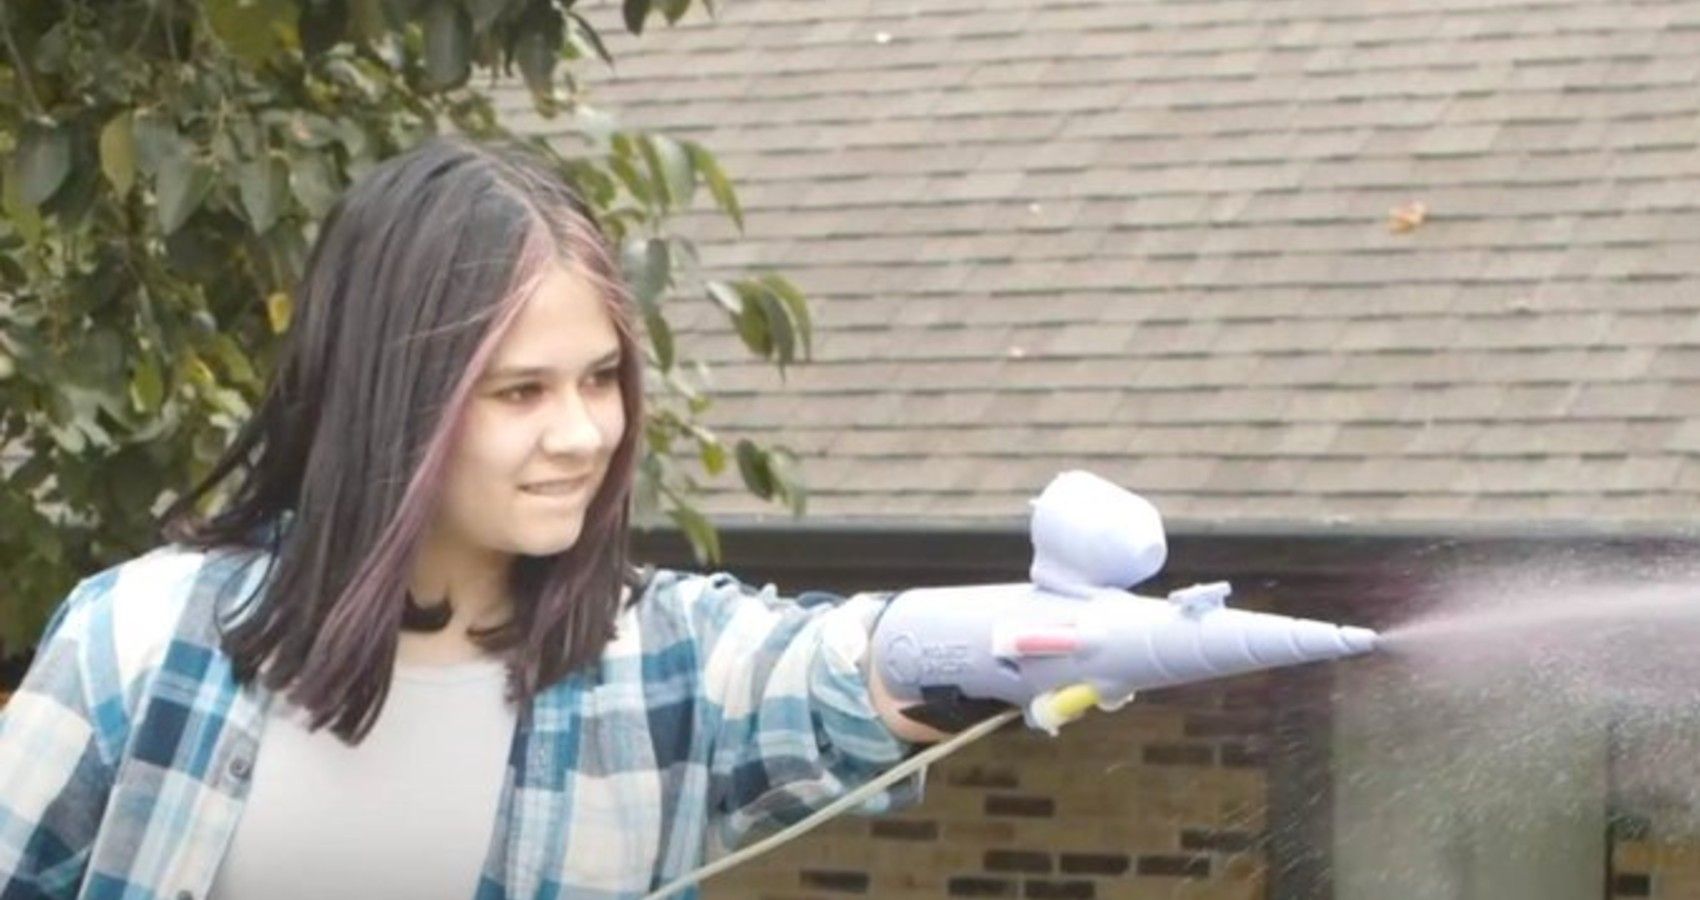 Teen Inventor Built Herself A Prosthetic Arm That Shoots Glitter